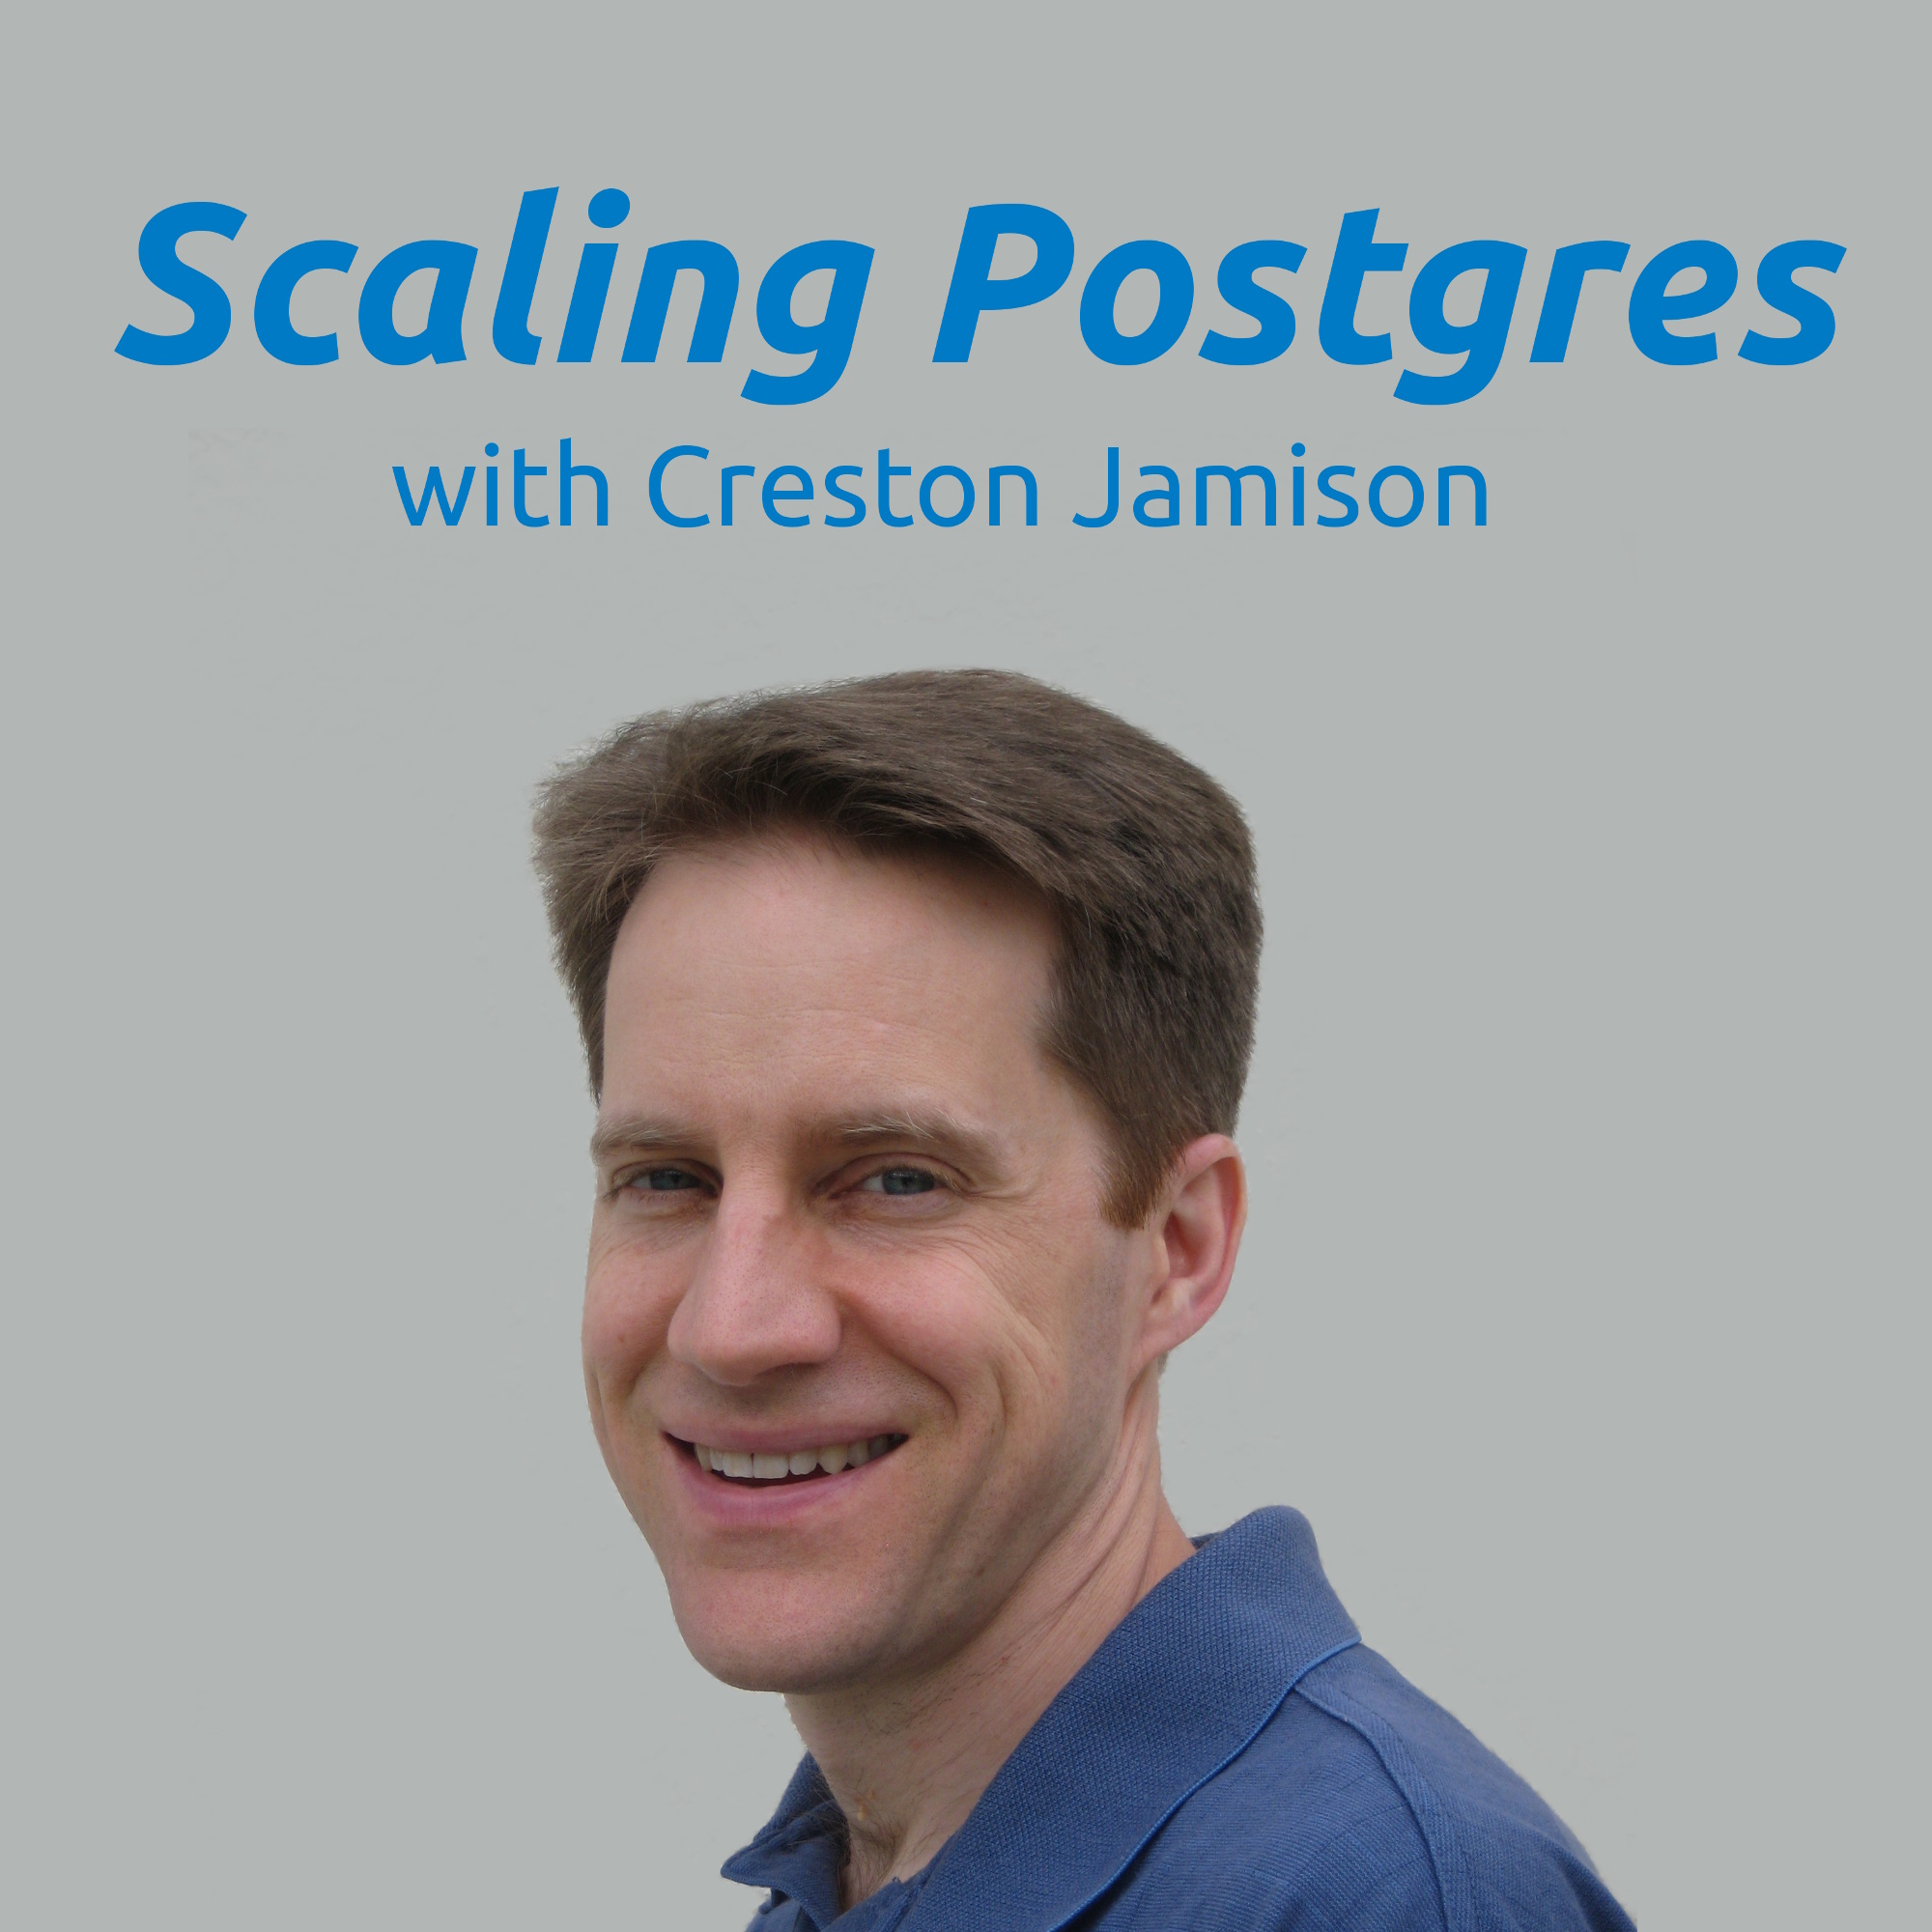 Man-In-The-Middle, pg_auto_failover, Lesser Known Features, LZ4 Compression | Scaling Postgres 191